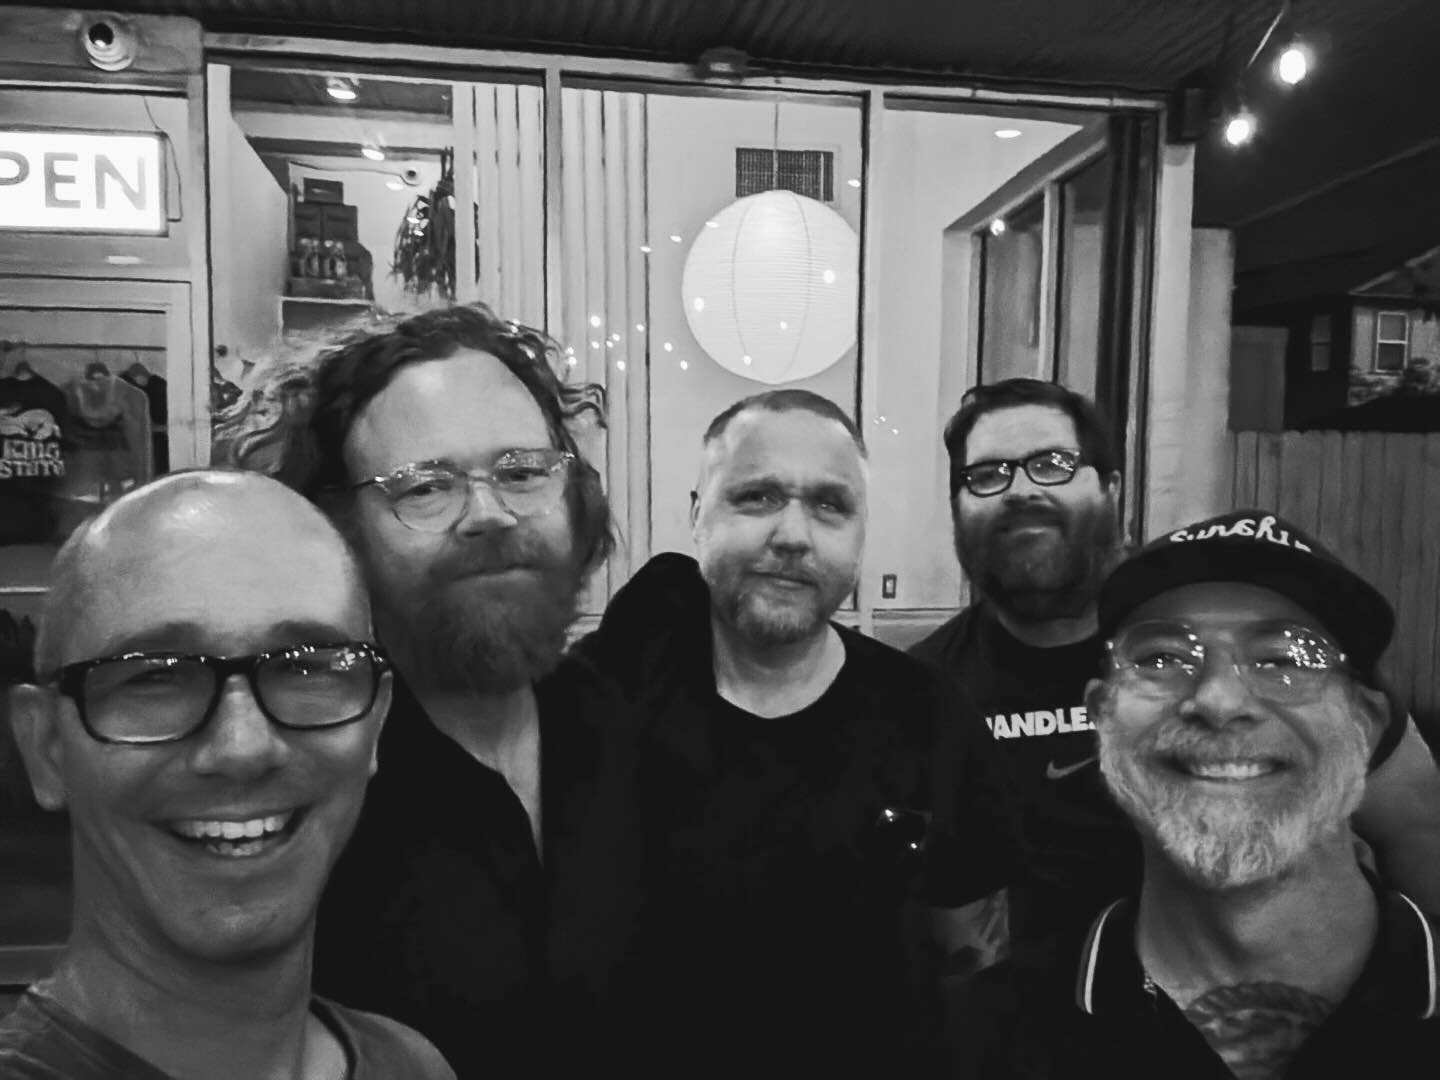 Had a great time catching up with friends from our summer camp days, punk shows, and skate parks adventures. Great hand Jason, Tommy, Dave, &amp; Andy! Love you guys.